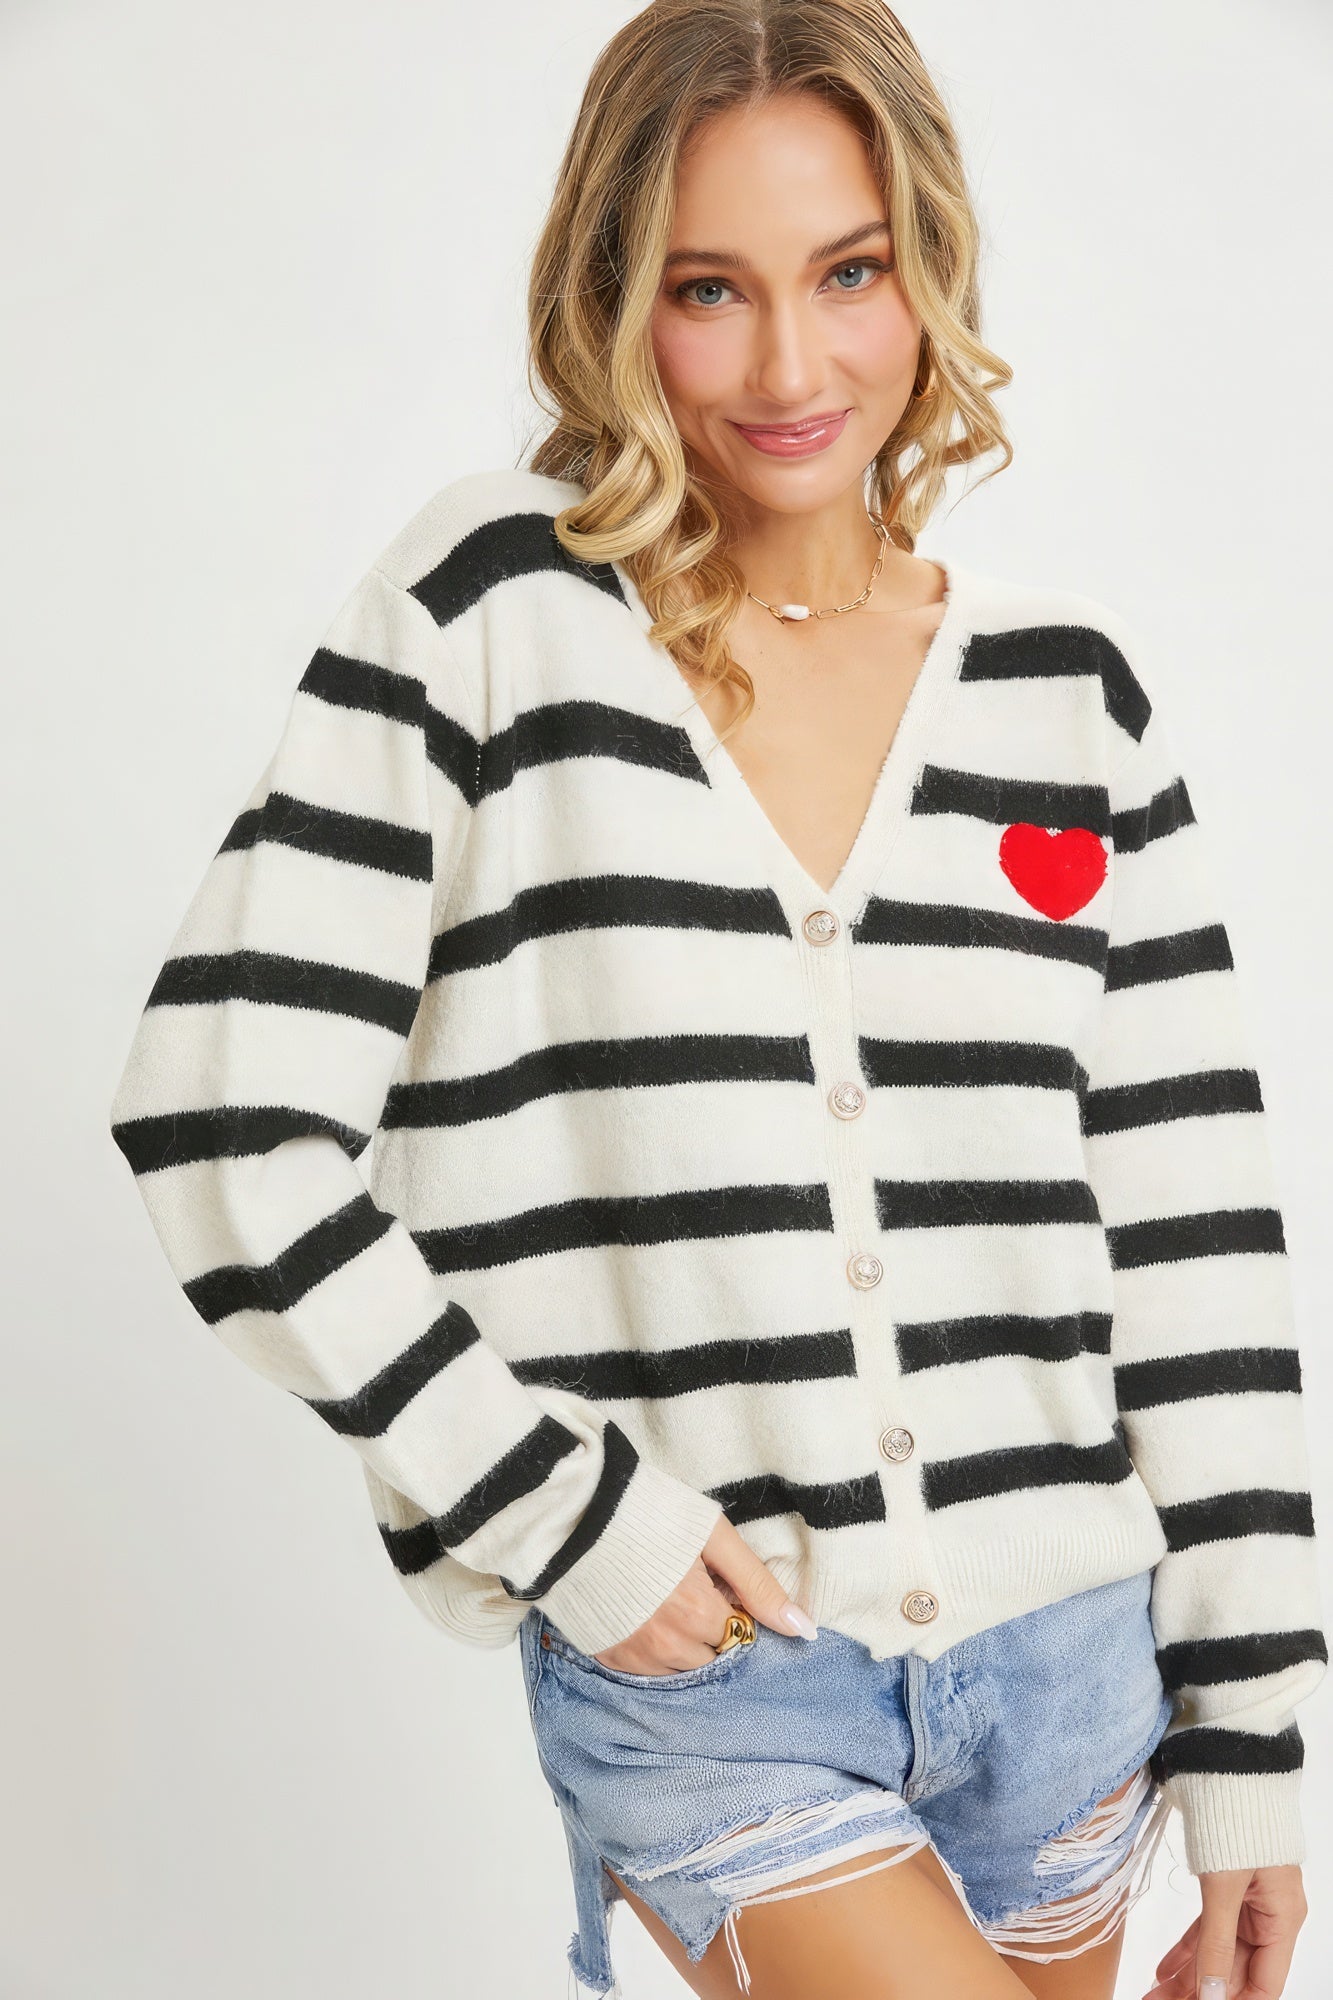 Women's Striped Cardigan With Heart Patch